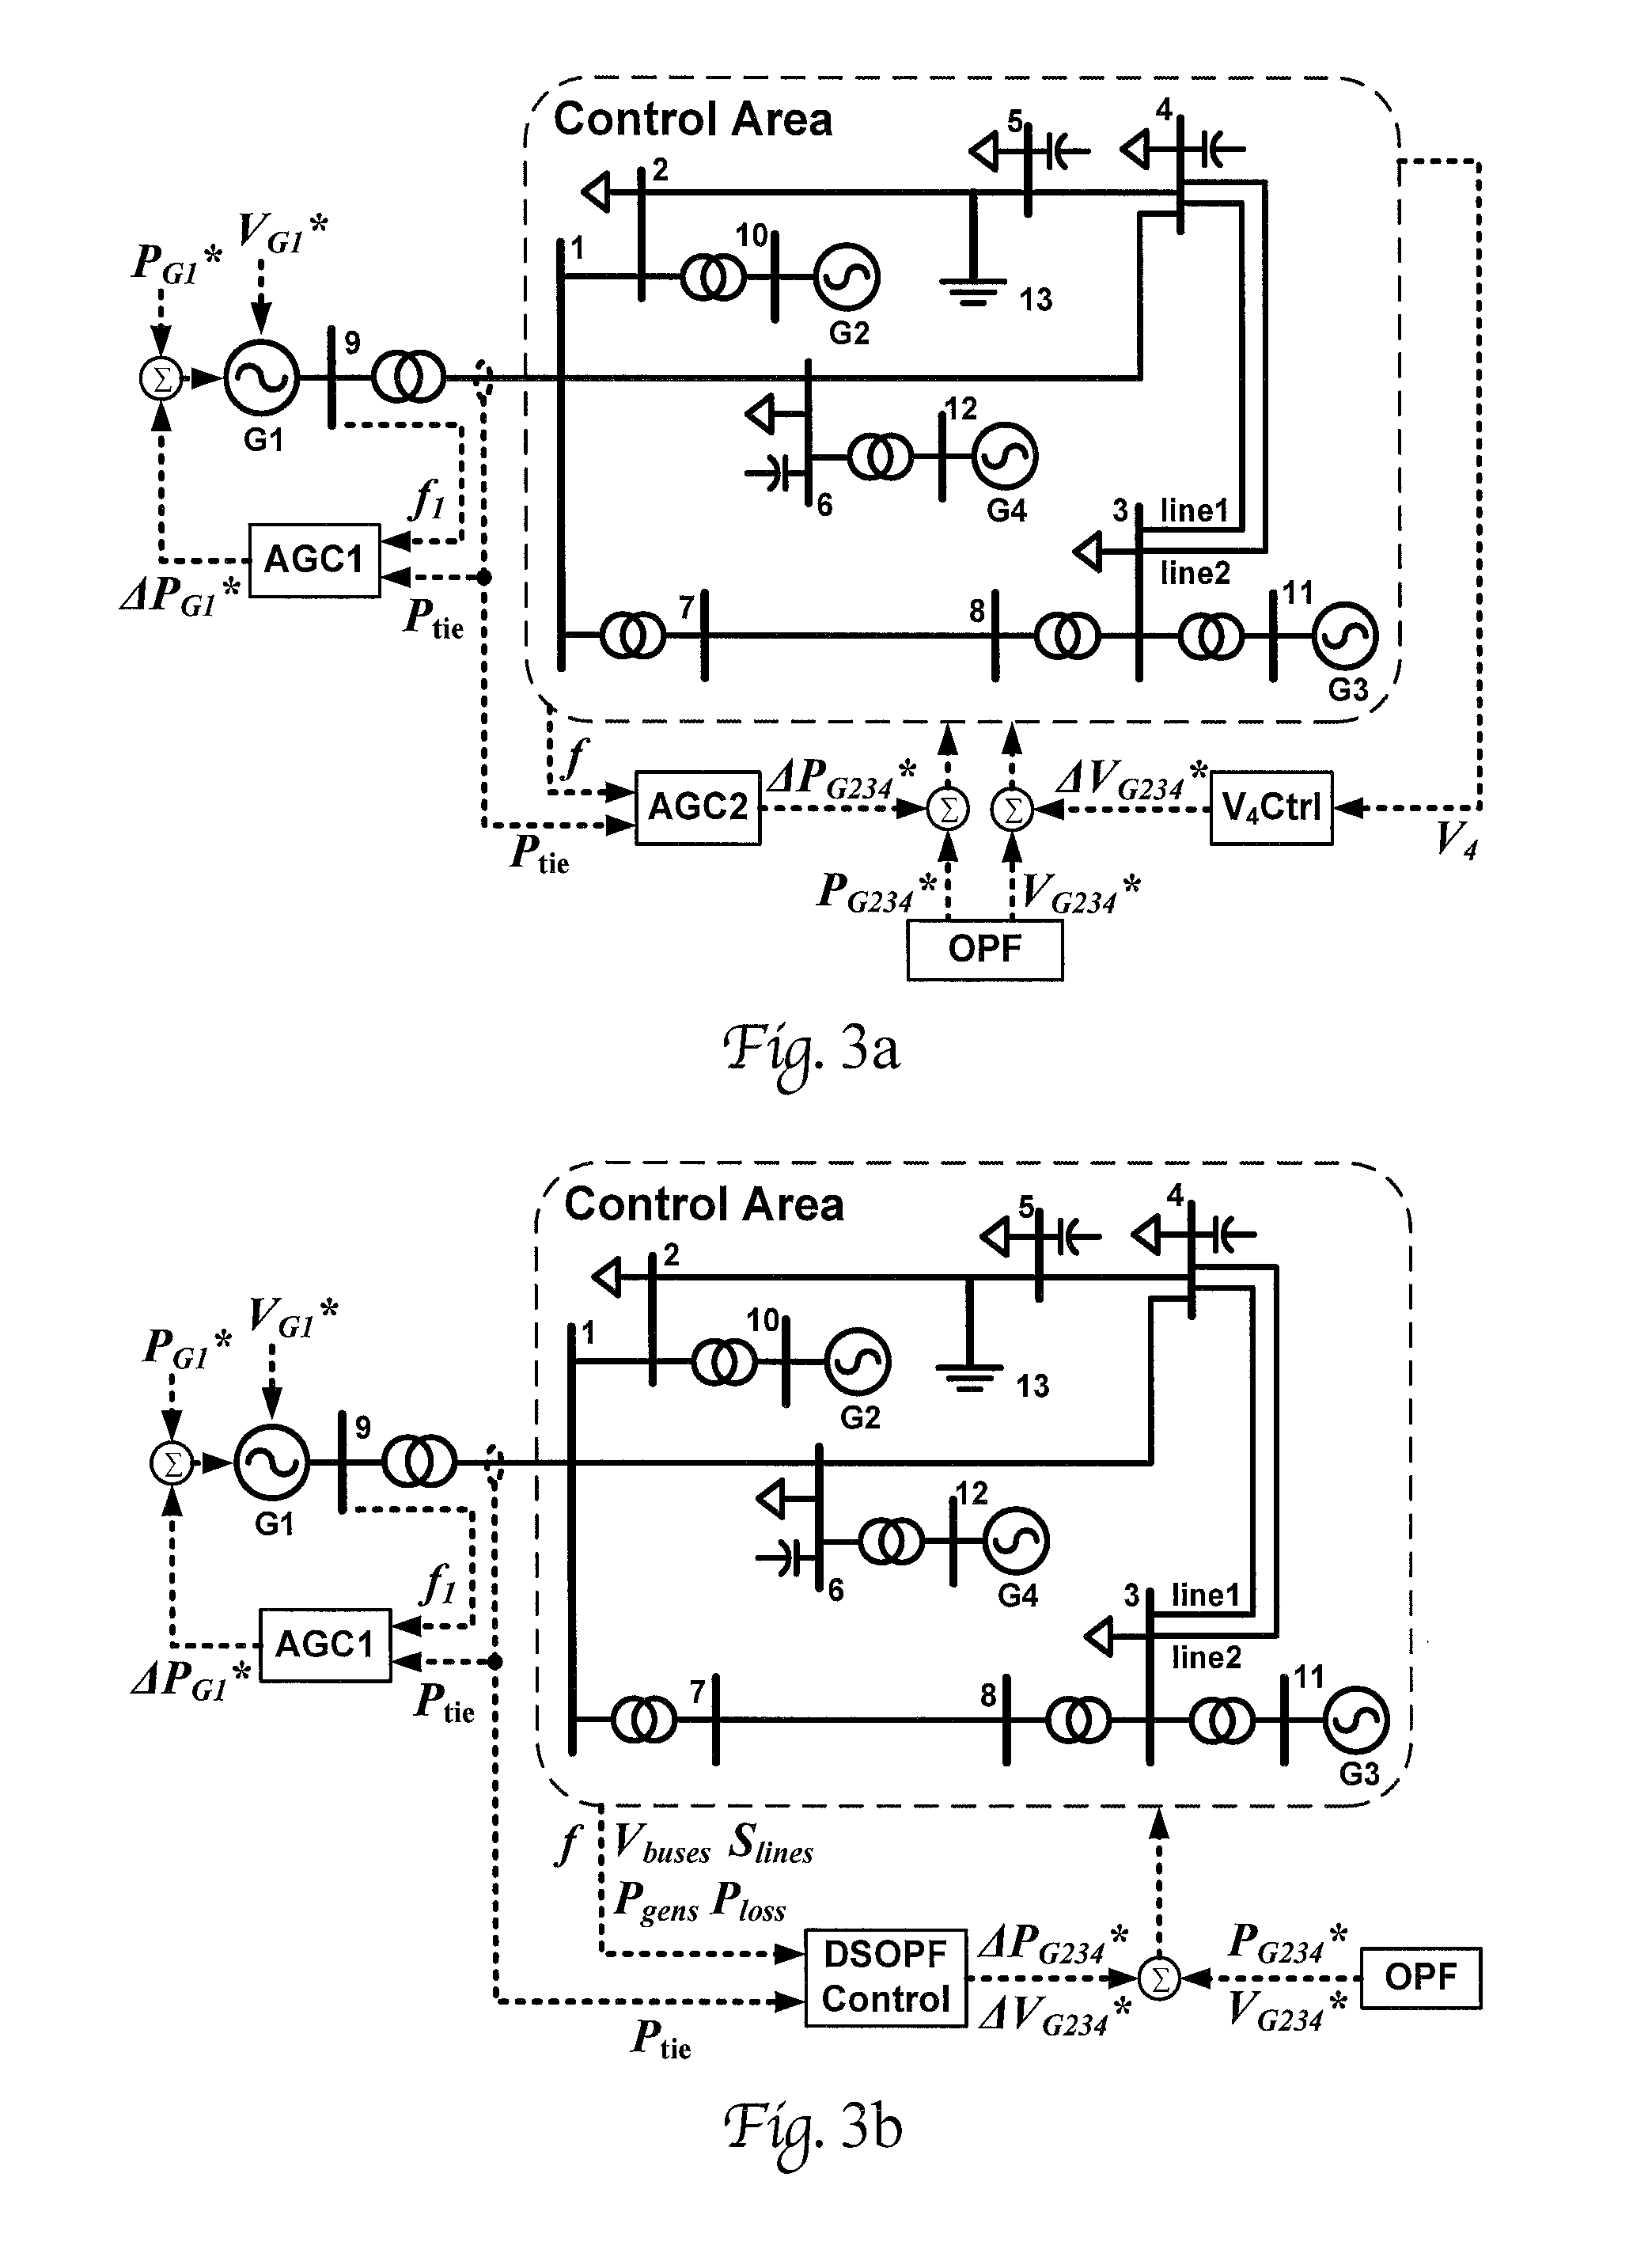 Method and system for dynamic stochastic optimal electric power flow control